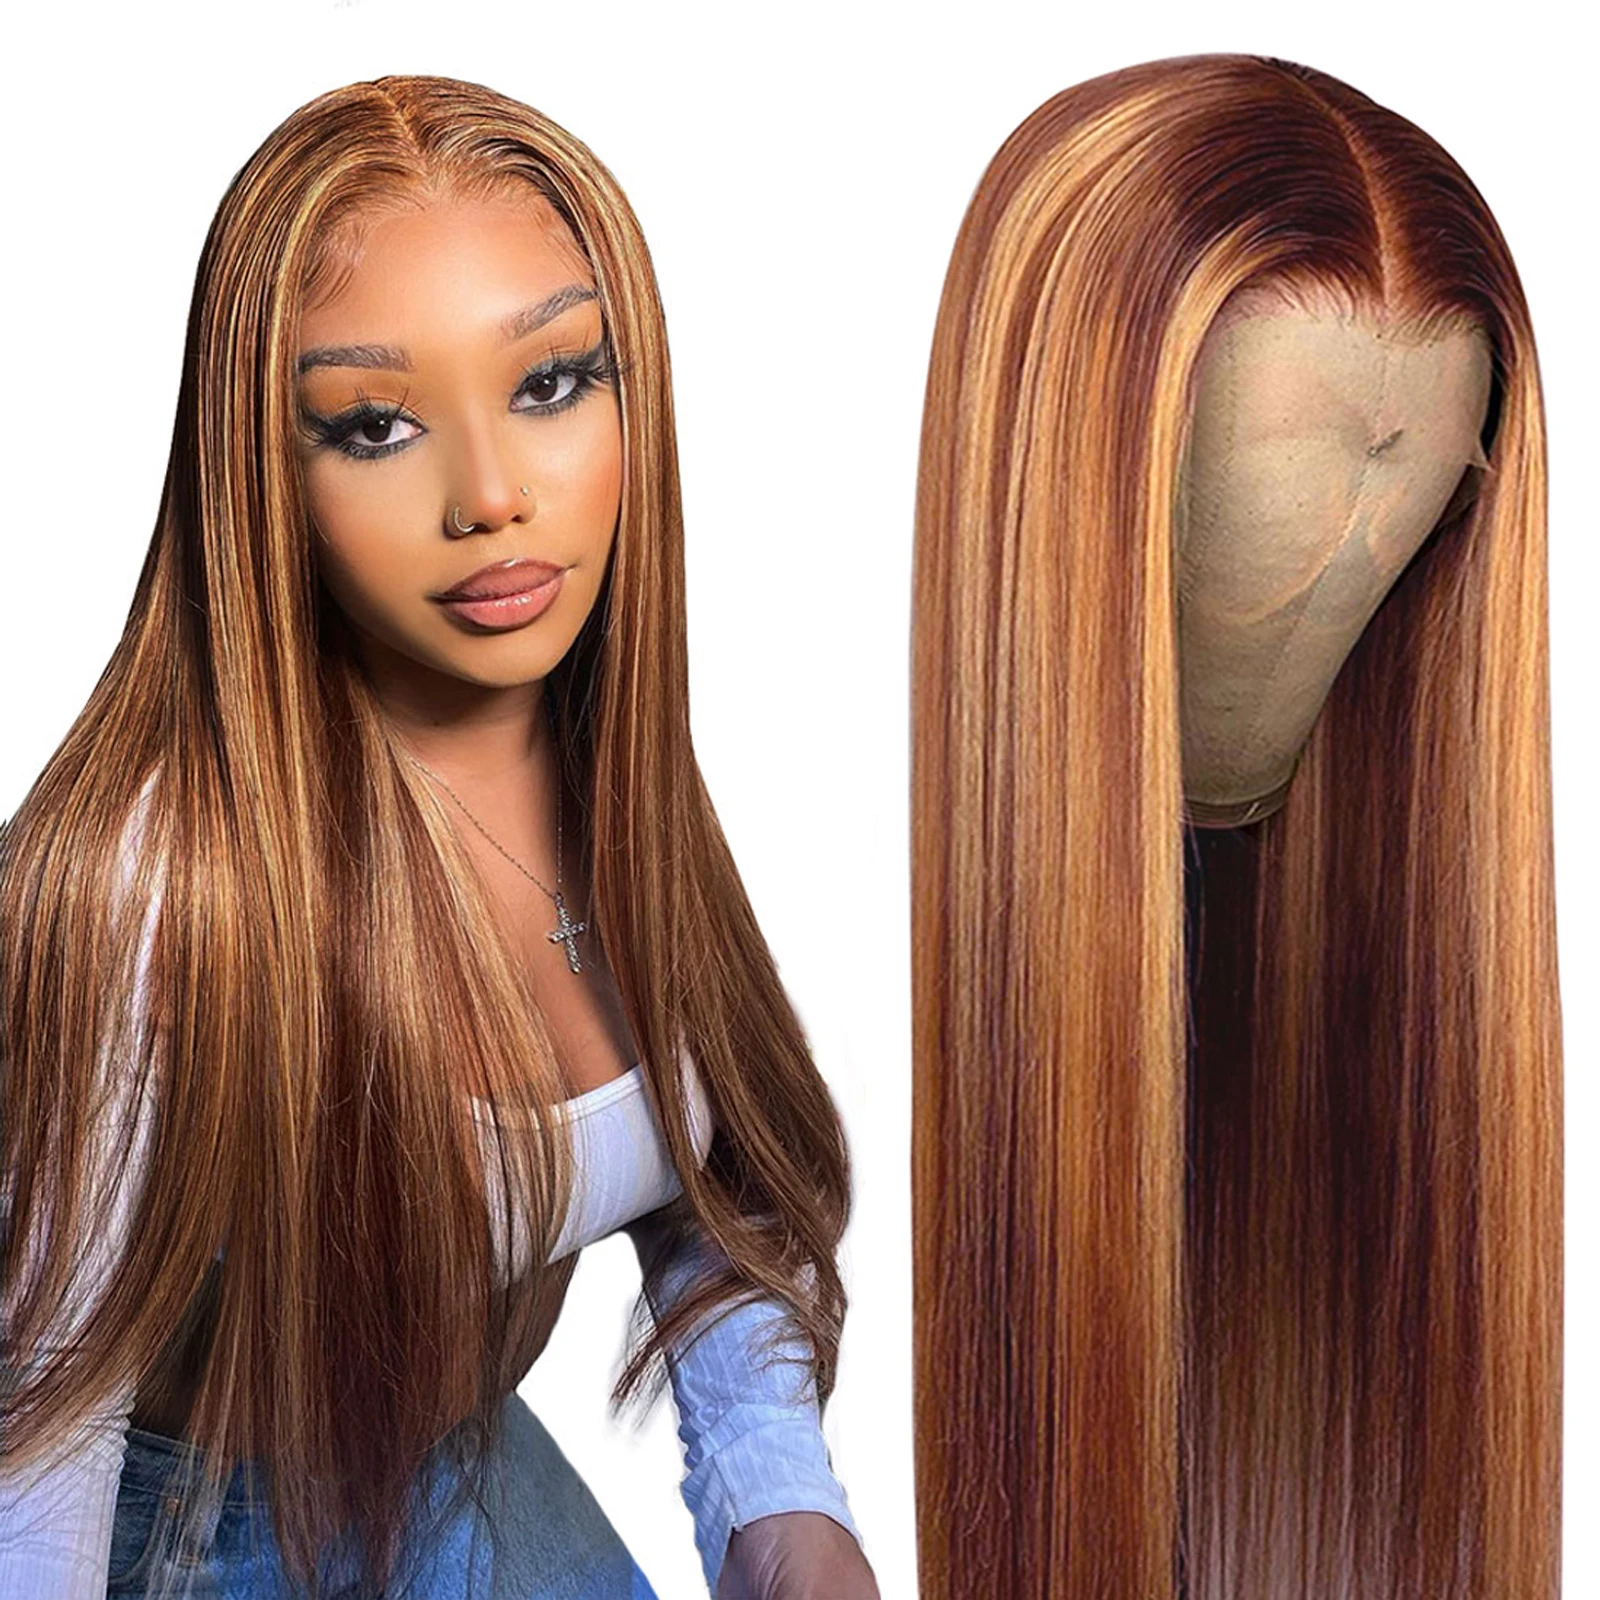 Straight wig Lace Frontal Human Hair Wigs 13x1 Lace wig for Women Human Hair with Natural Hairline Brown Colored Ombre